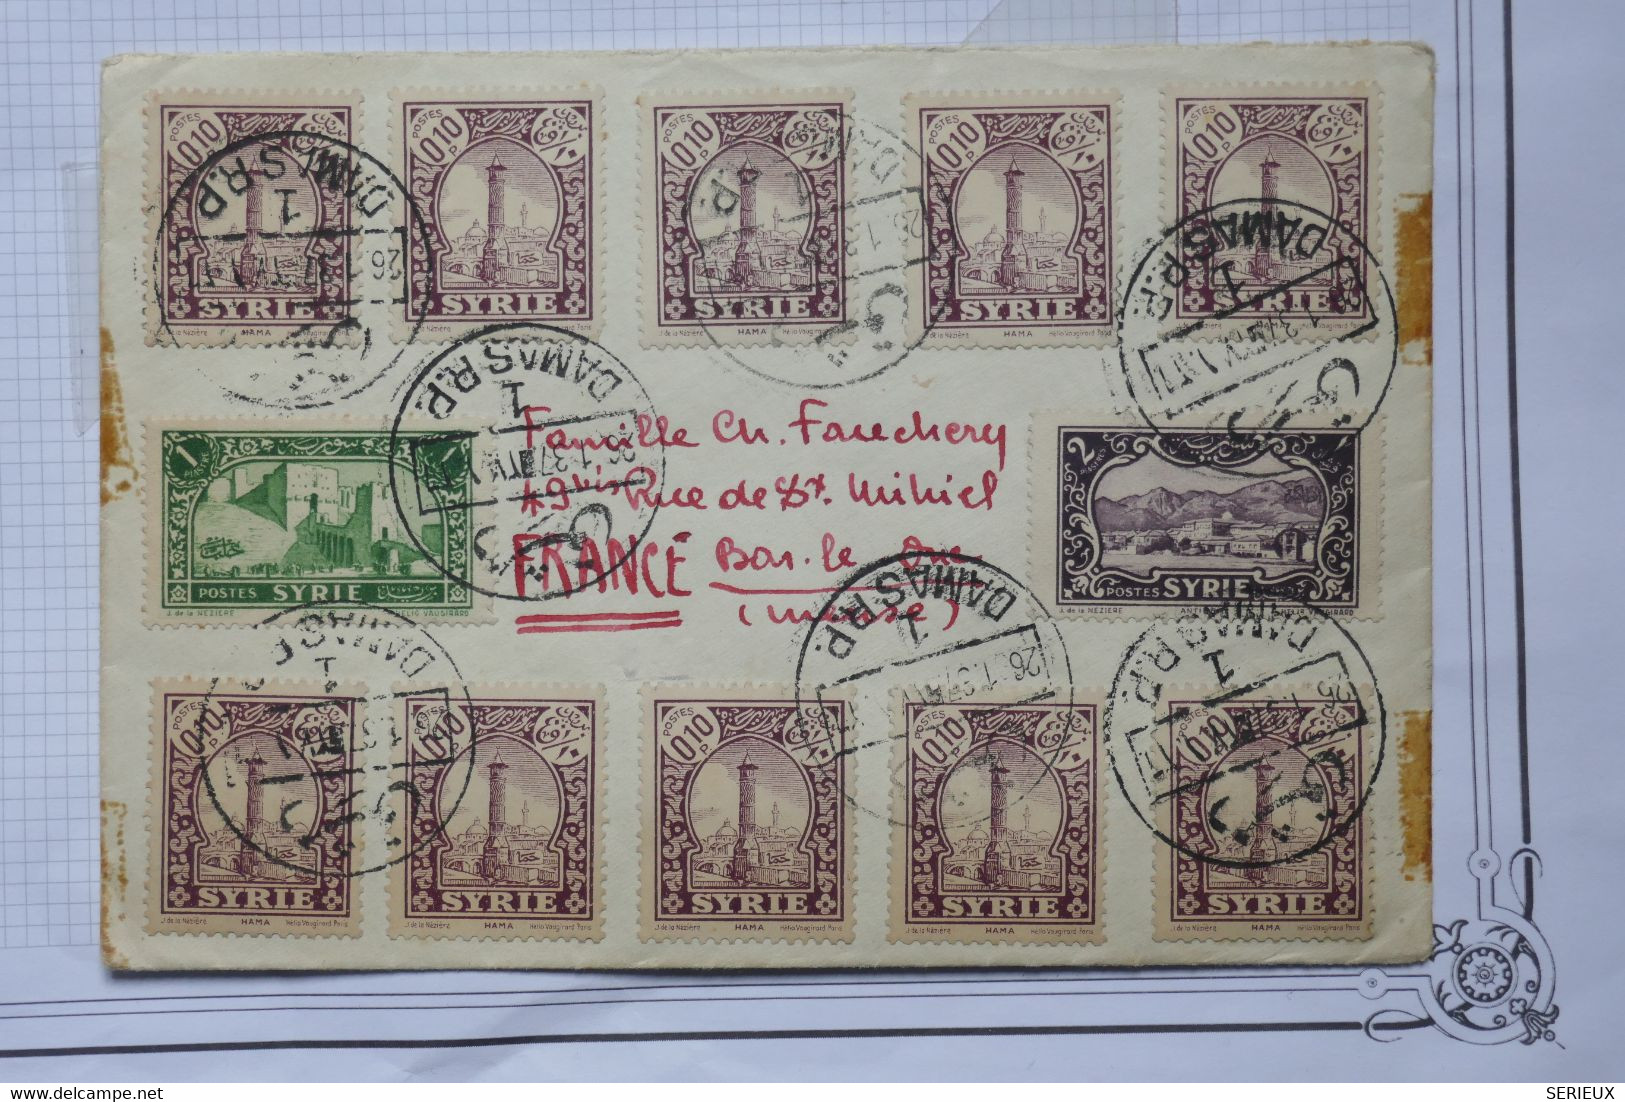 BE14  SYRIE  BELLE LETTRE RARE  1937 DAMAS A BAR LE DUC   FRANCE +LLYOD TRIESTINO+++AFFRANCH. INTERESSANT - Covers & Documents